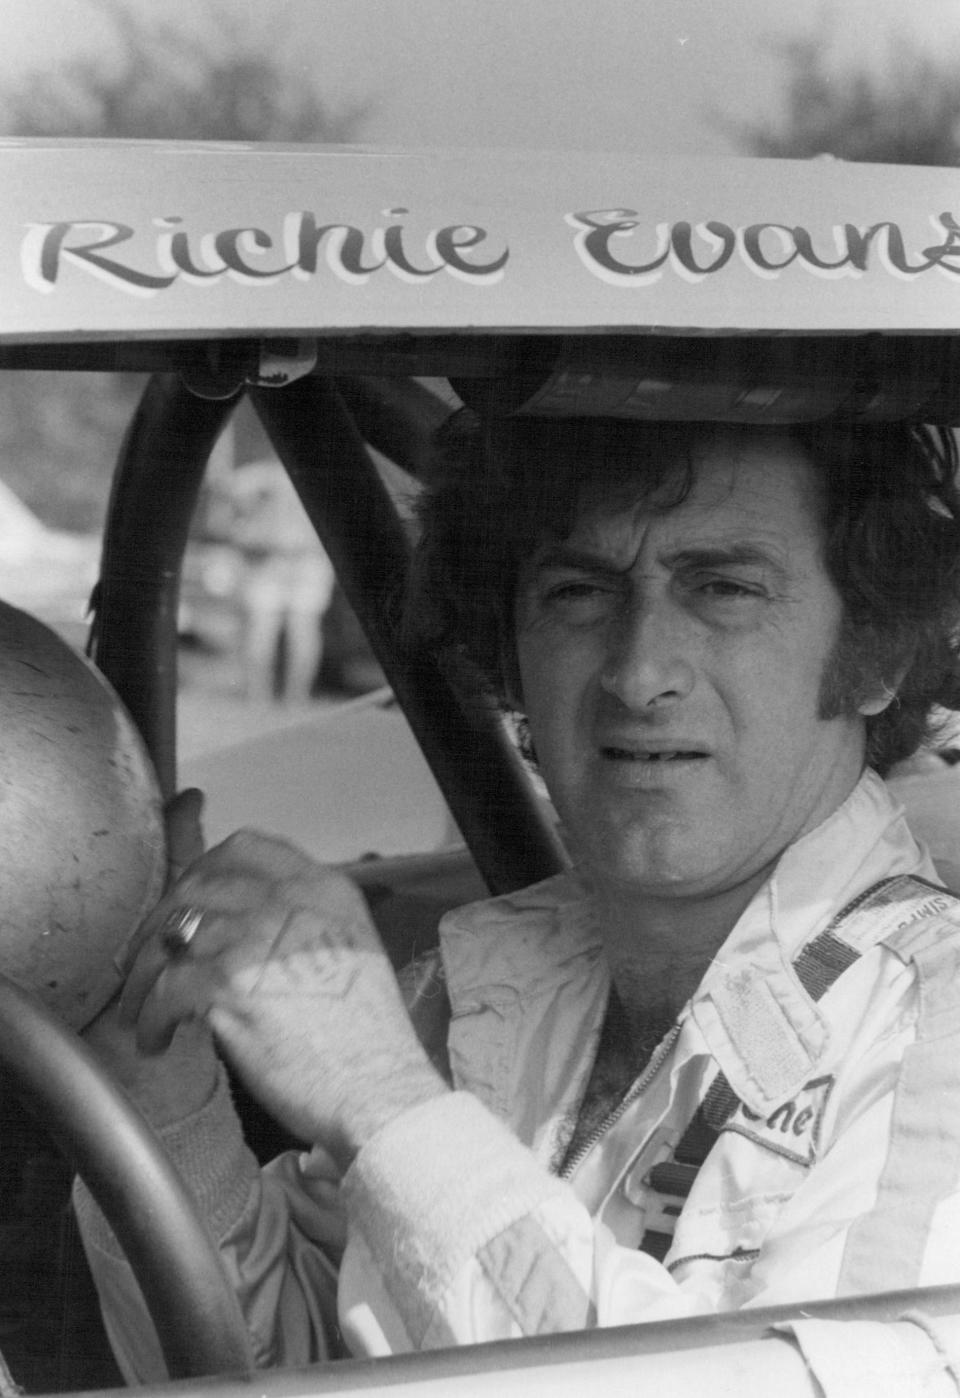 Richie Evans, won more than 450 races and nine NASCAR national modified championships during his career. He was inducted into the NASCAR Hall of Fame in 2012.